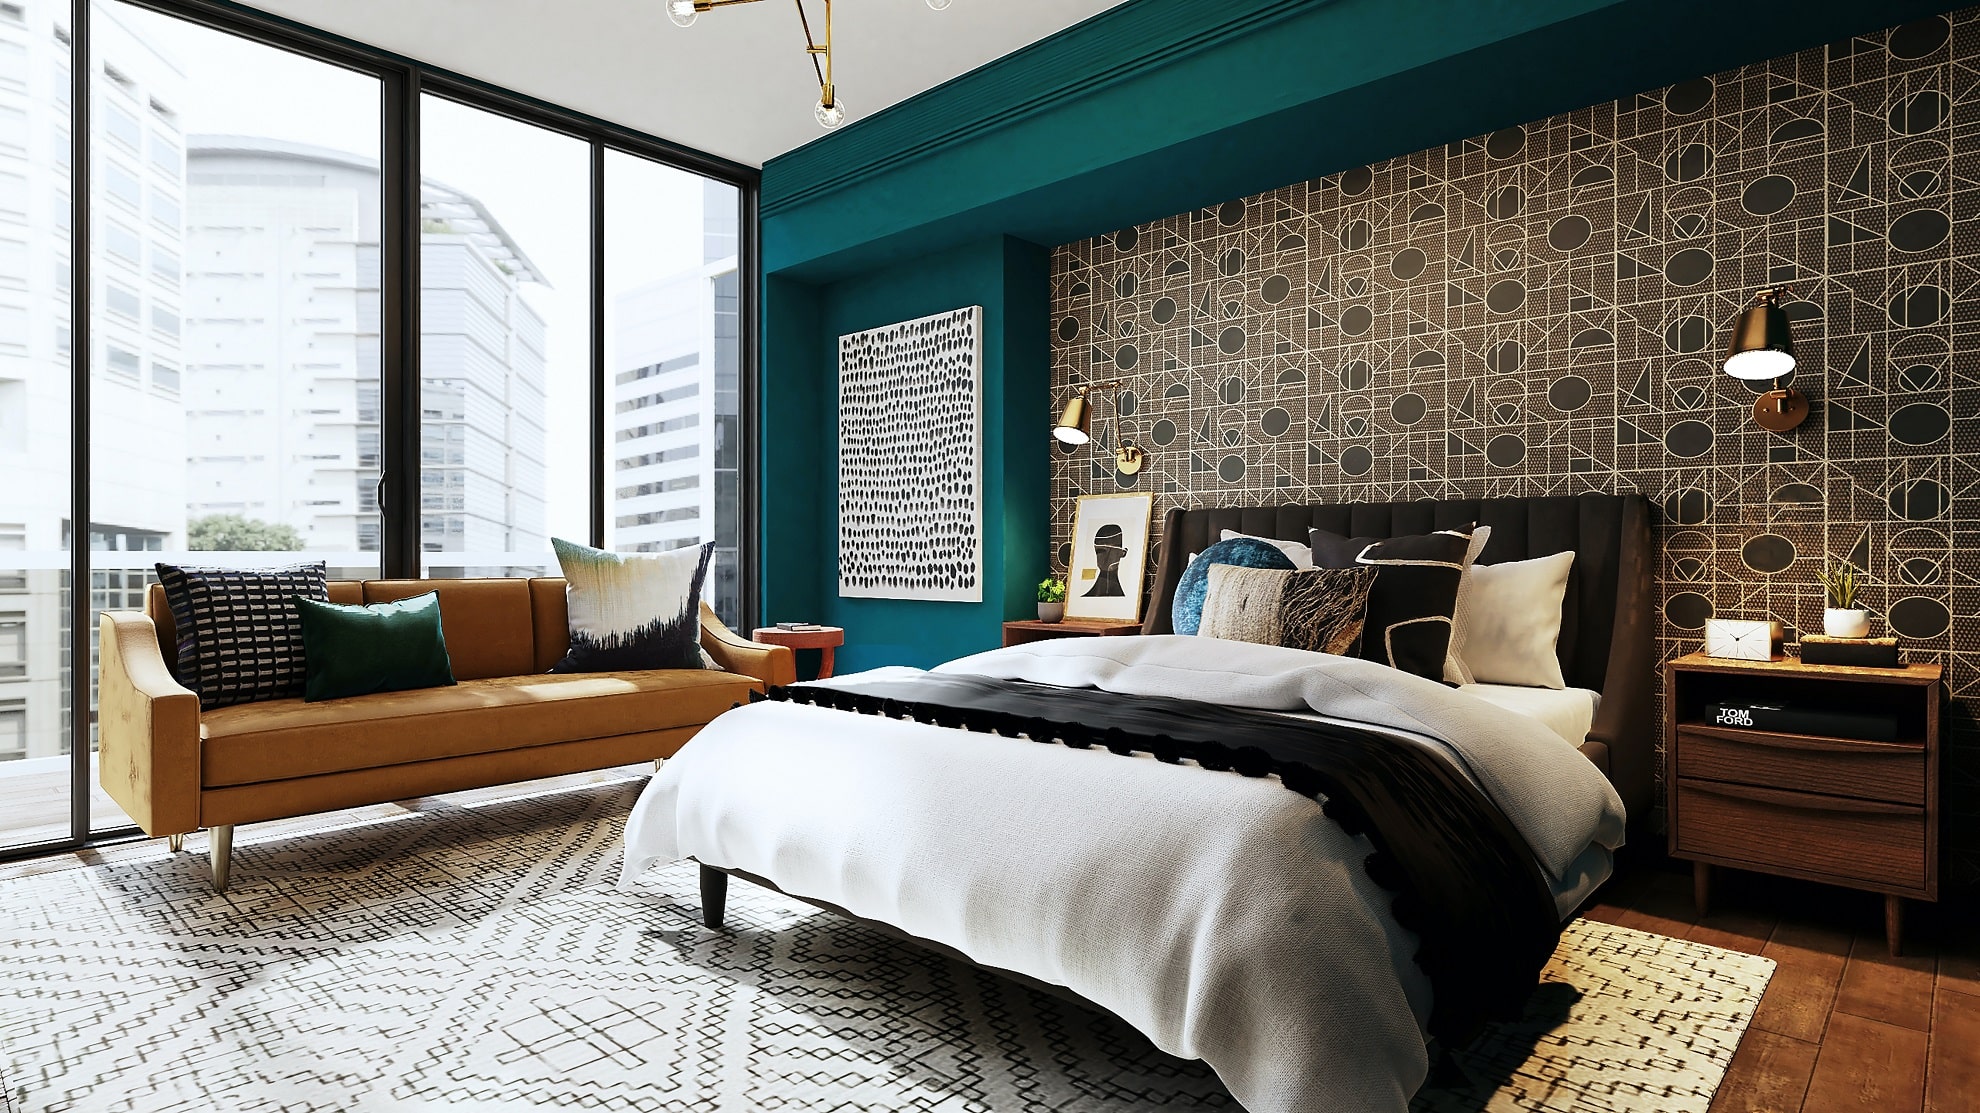 An apartment bedroom with textured walls and picture frames, patterned rugs, and terra cotta furniture.